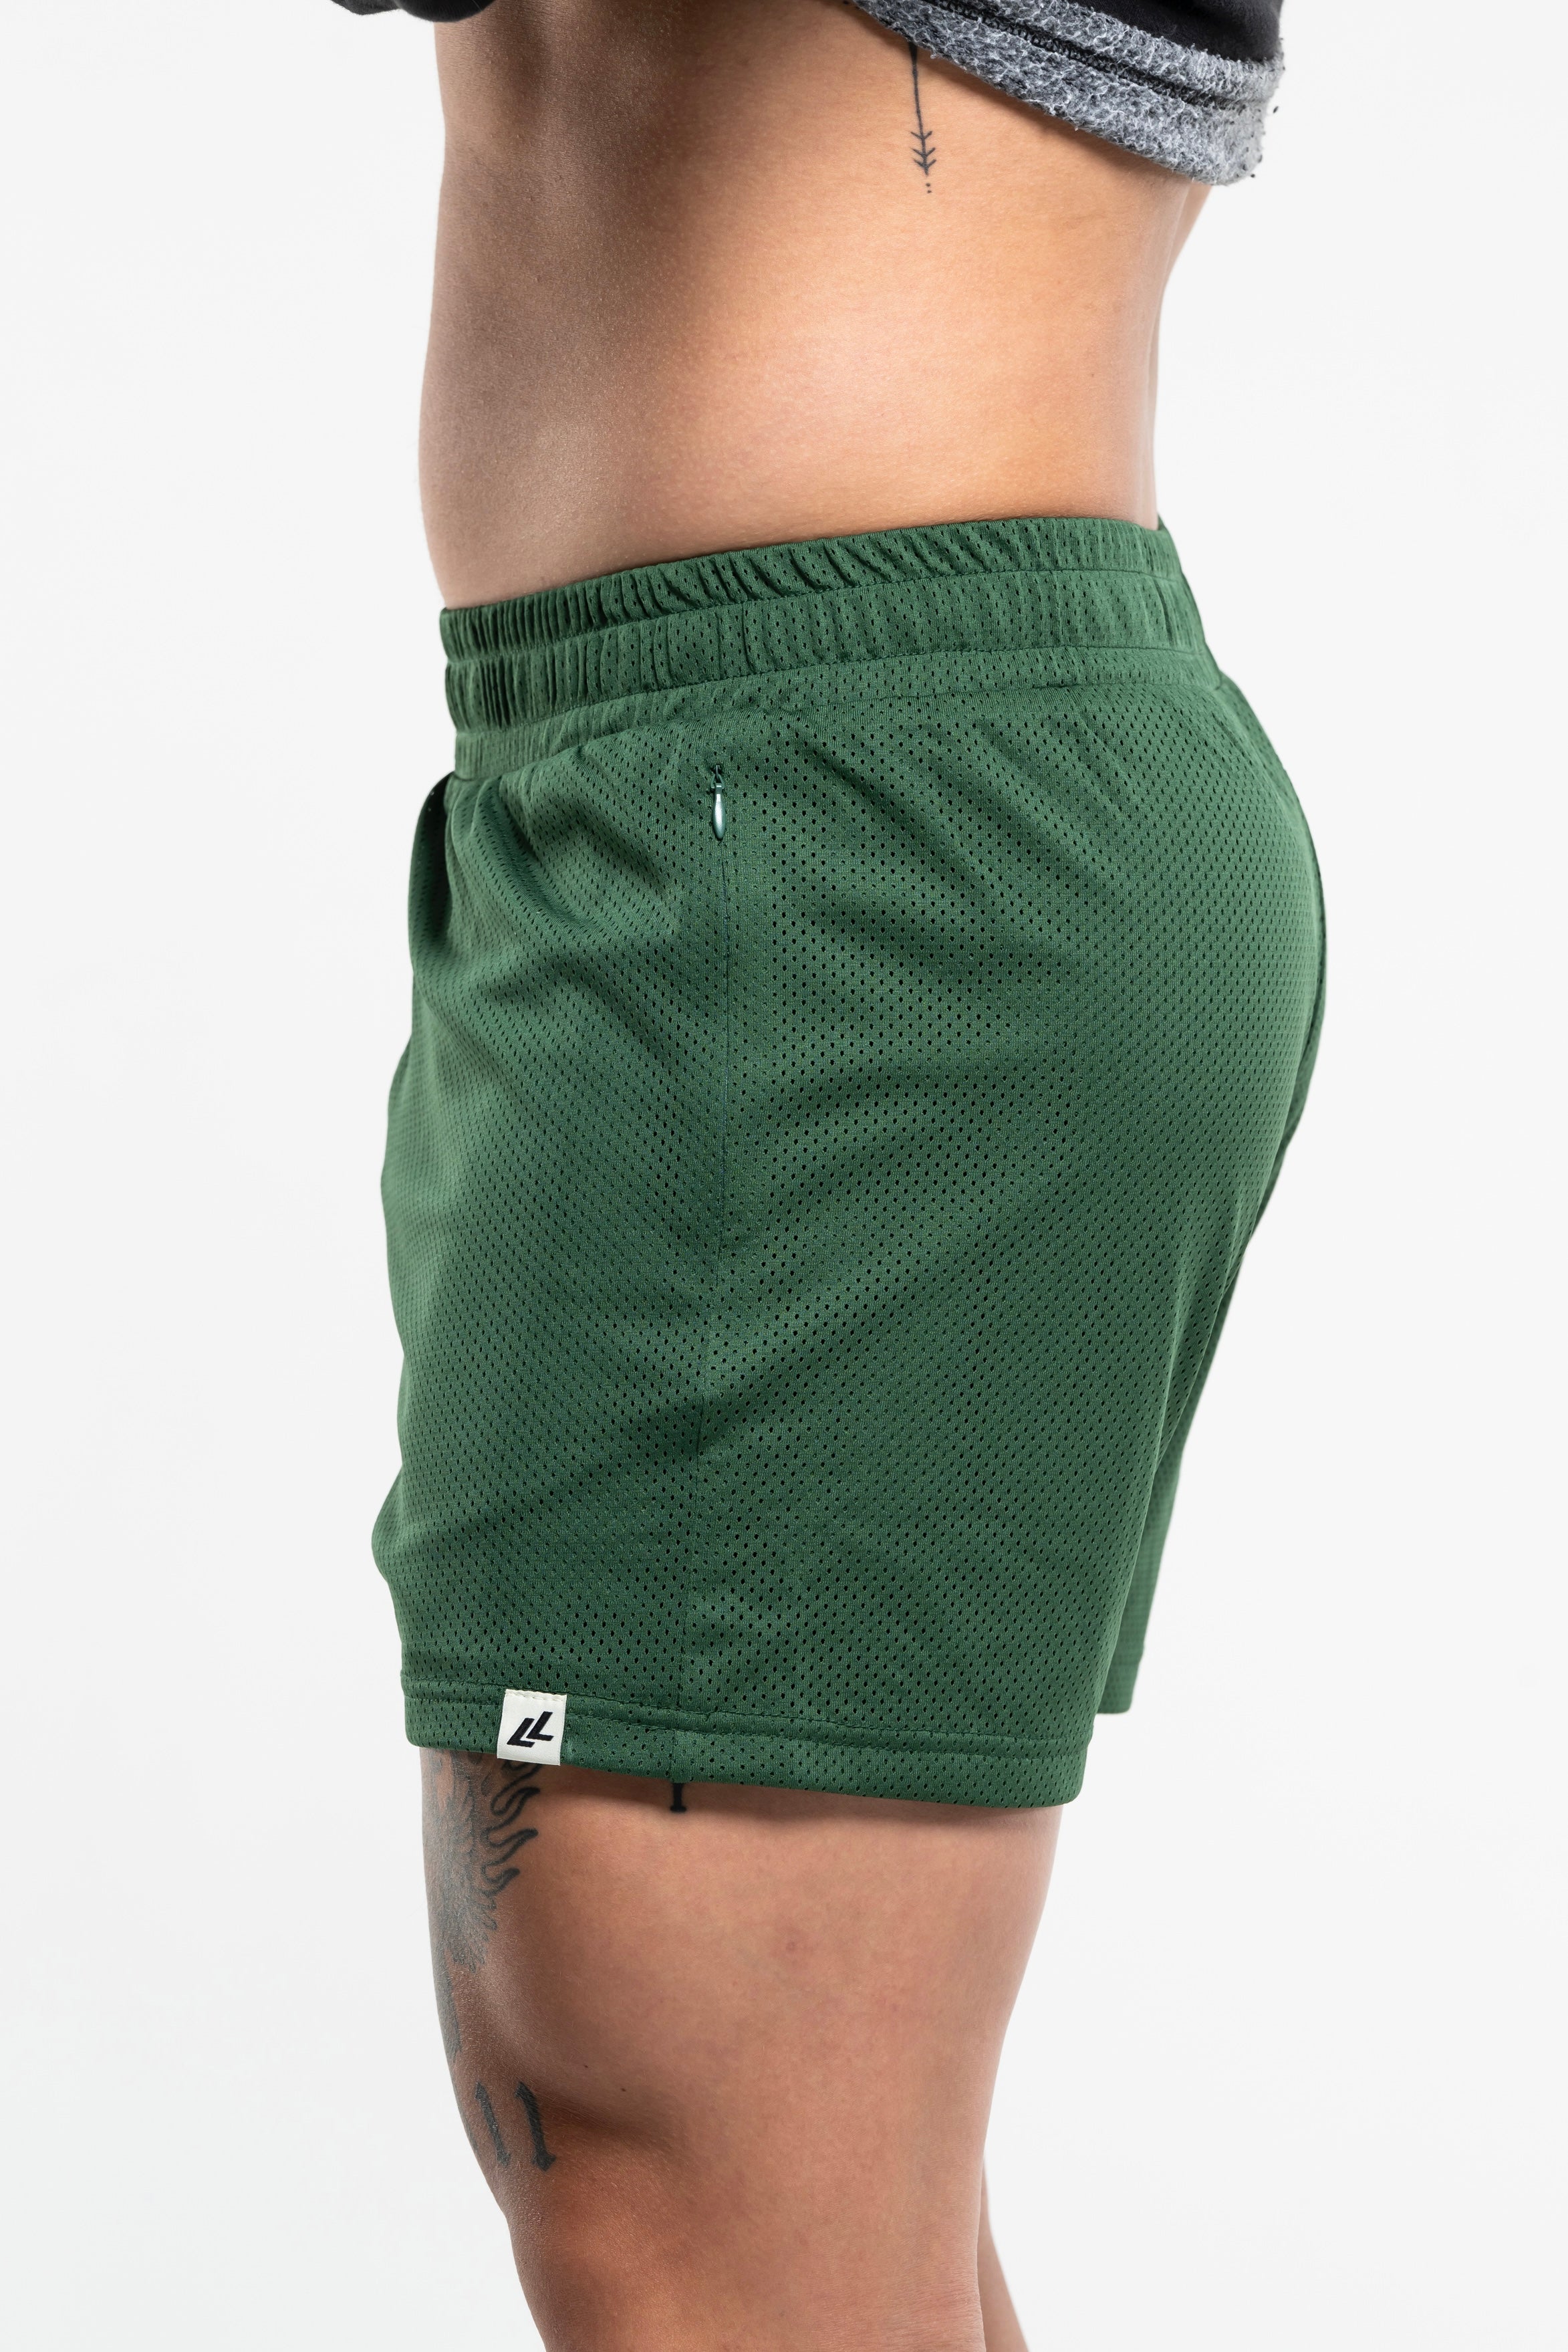 Forest Flexers workout shorts